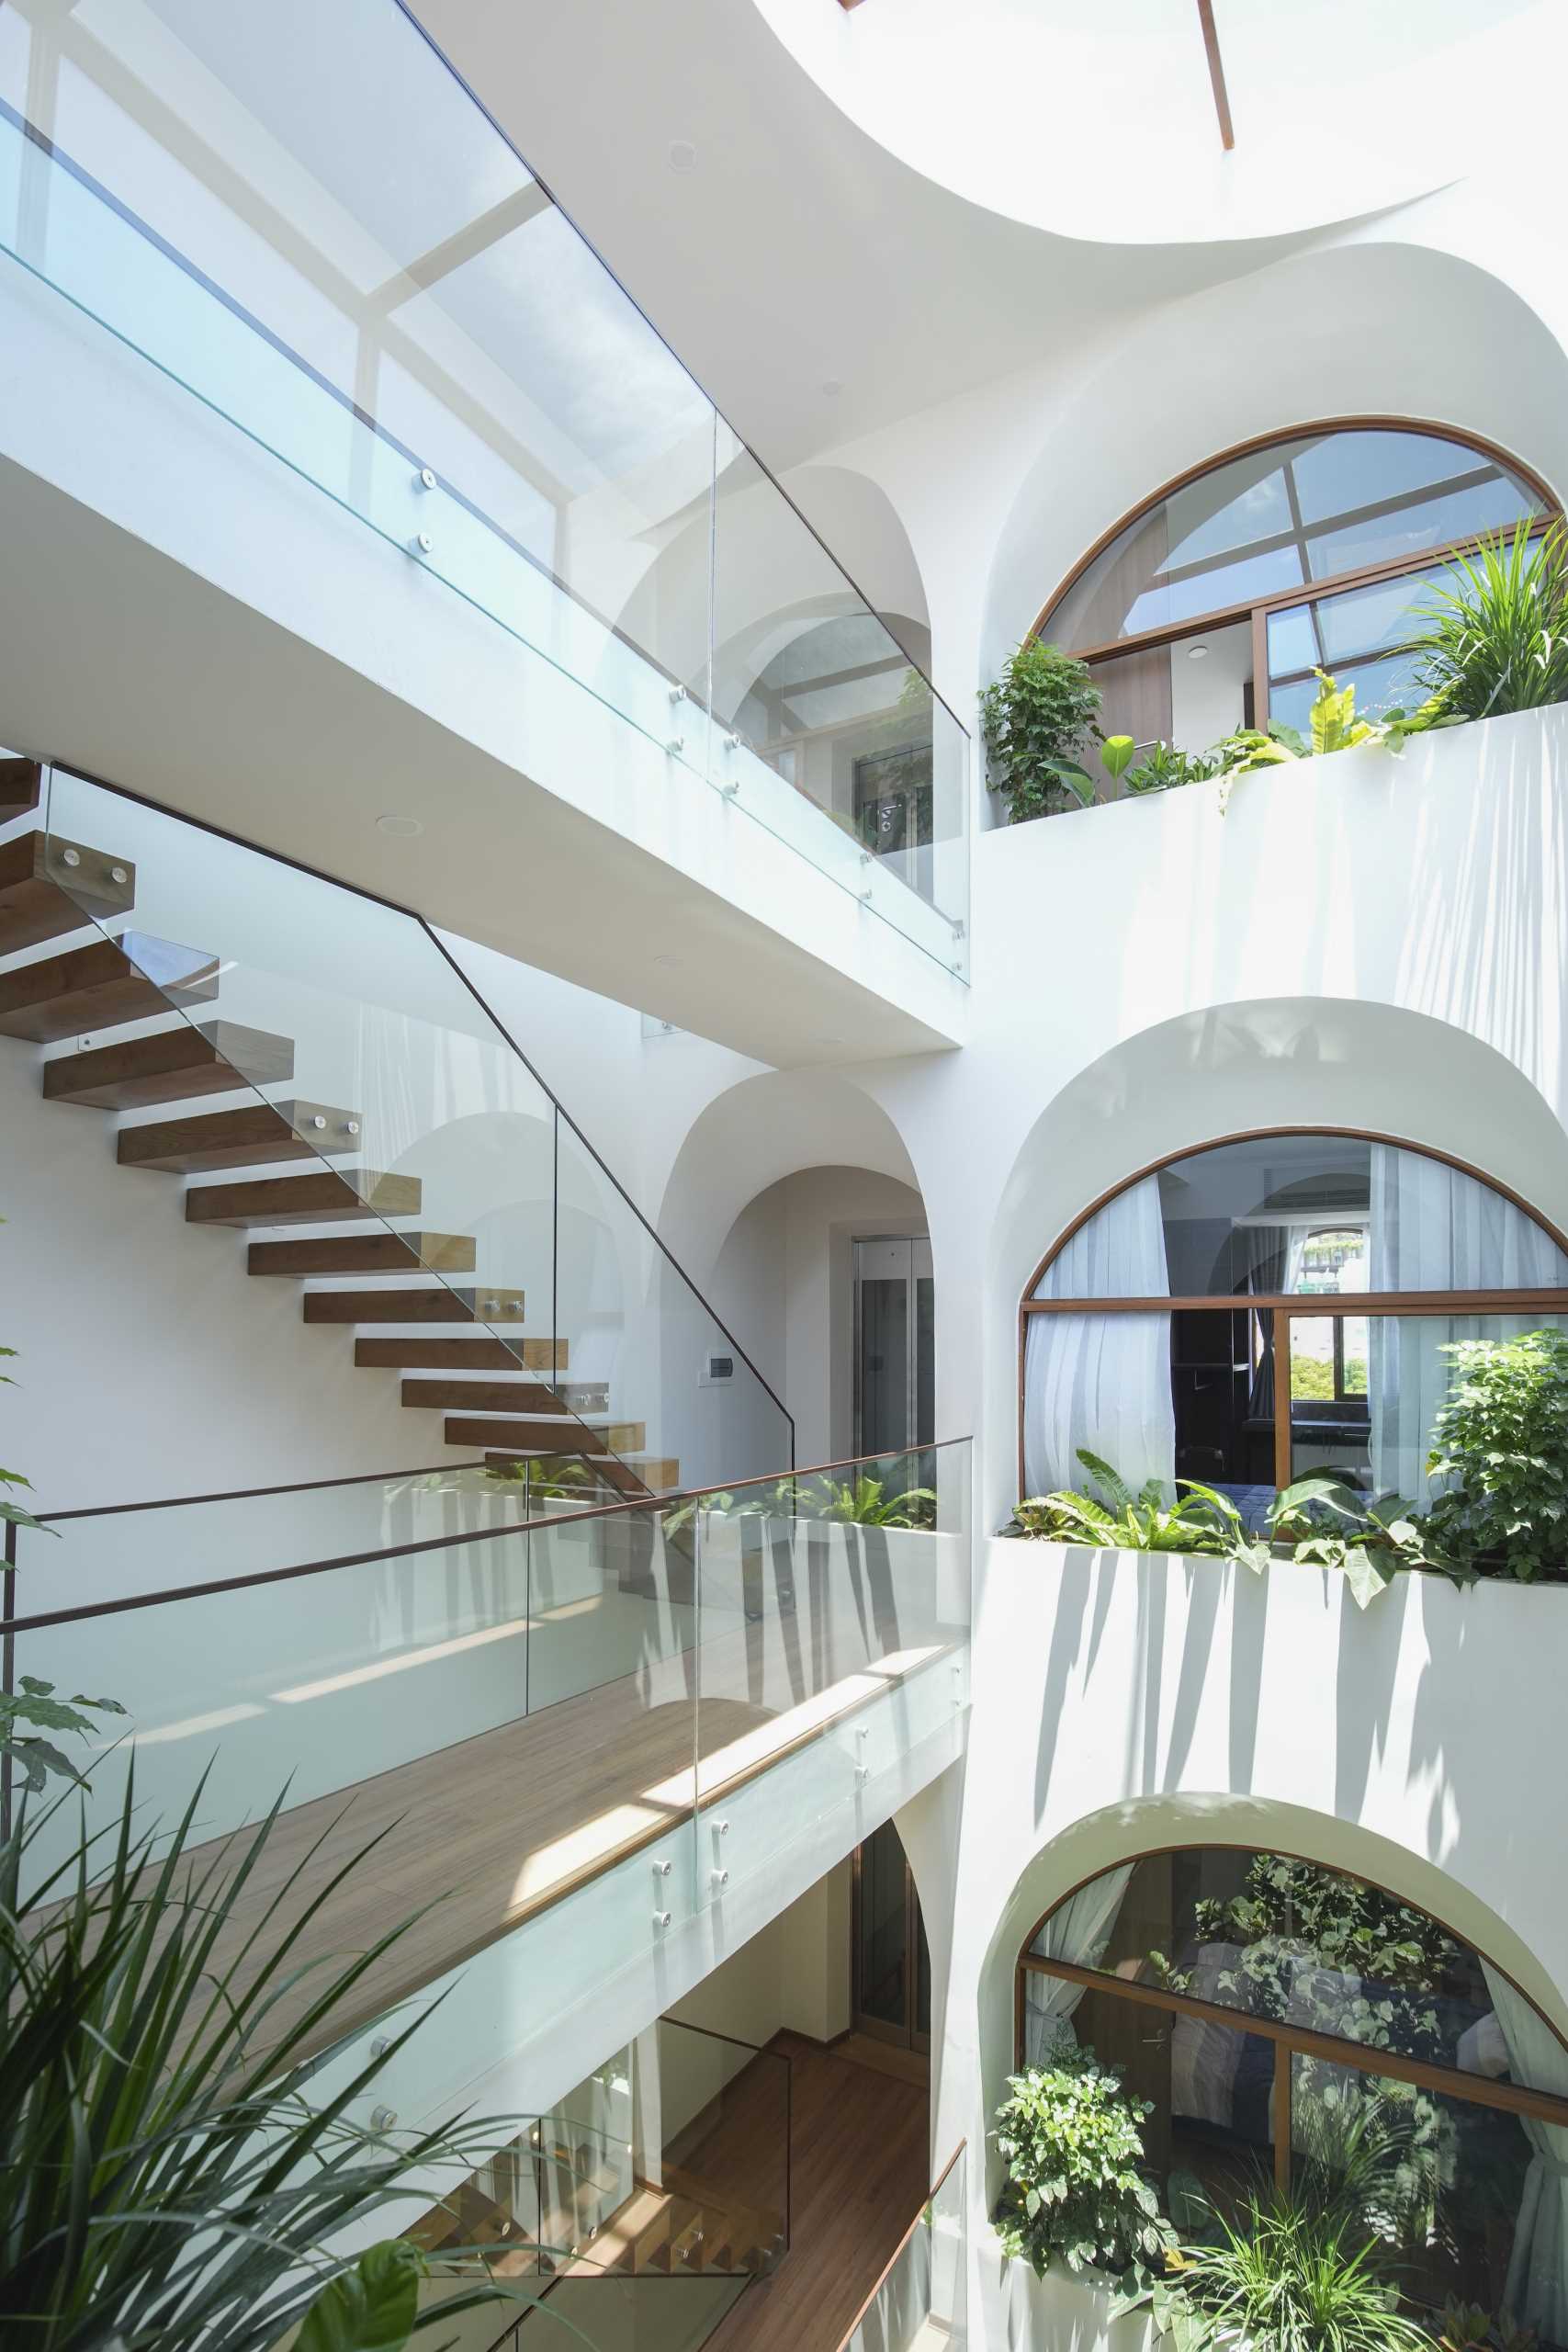 A modern home with an atrium, wood stairs with glass railings, arched openings, and interior bridges.